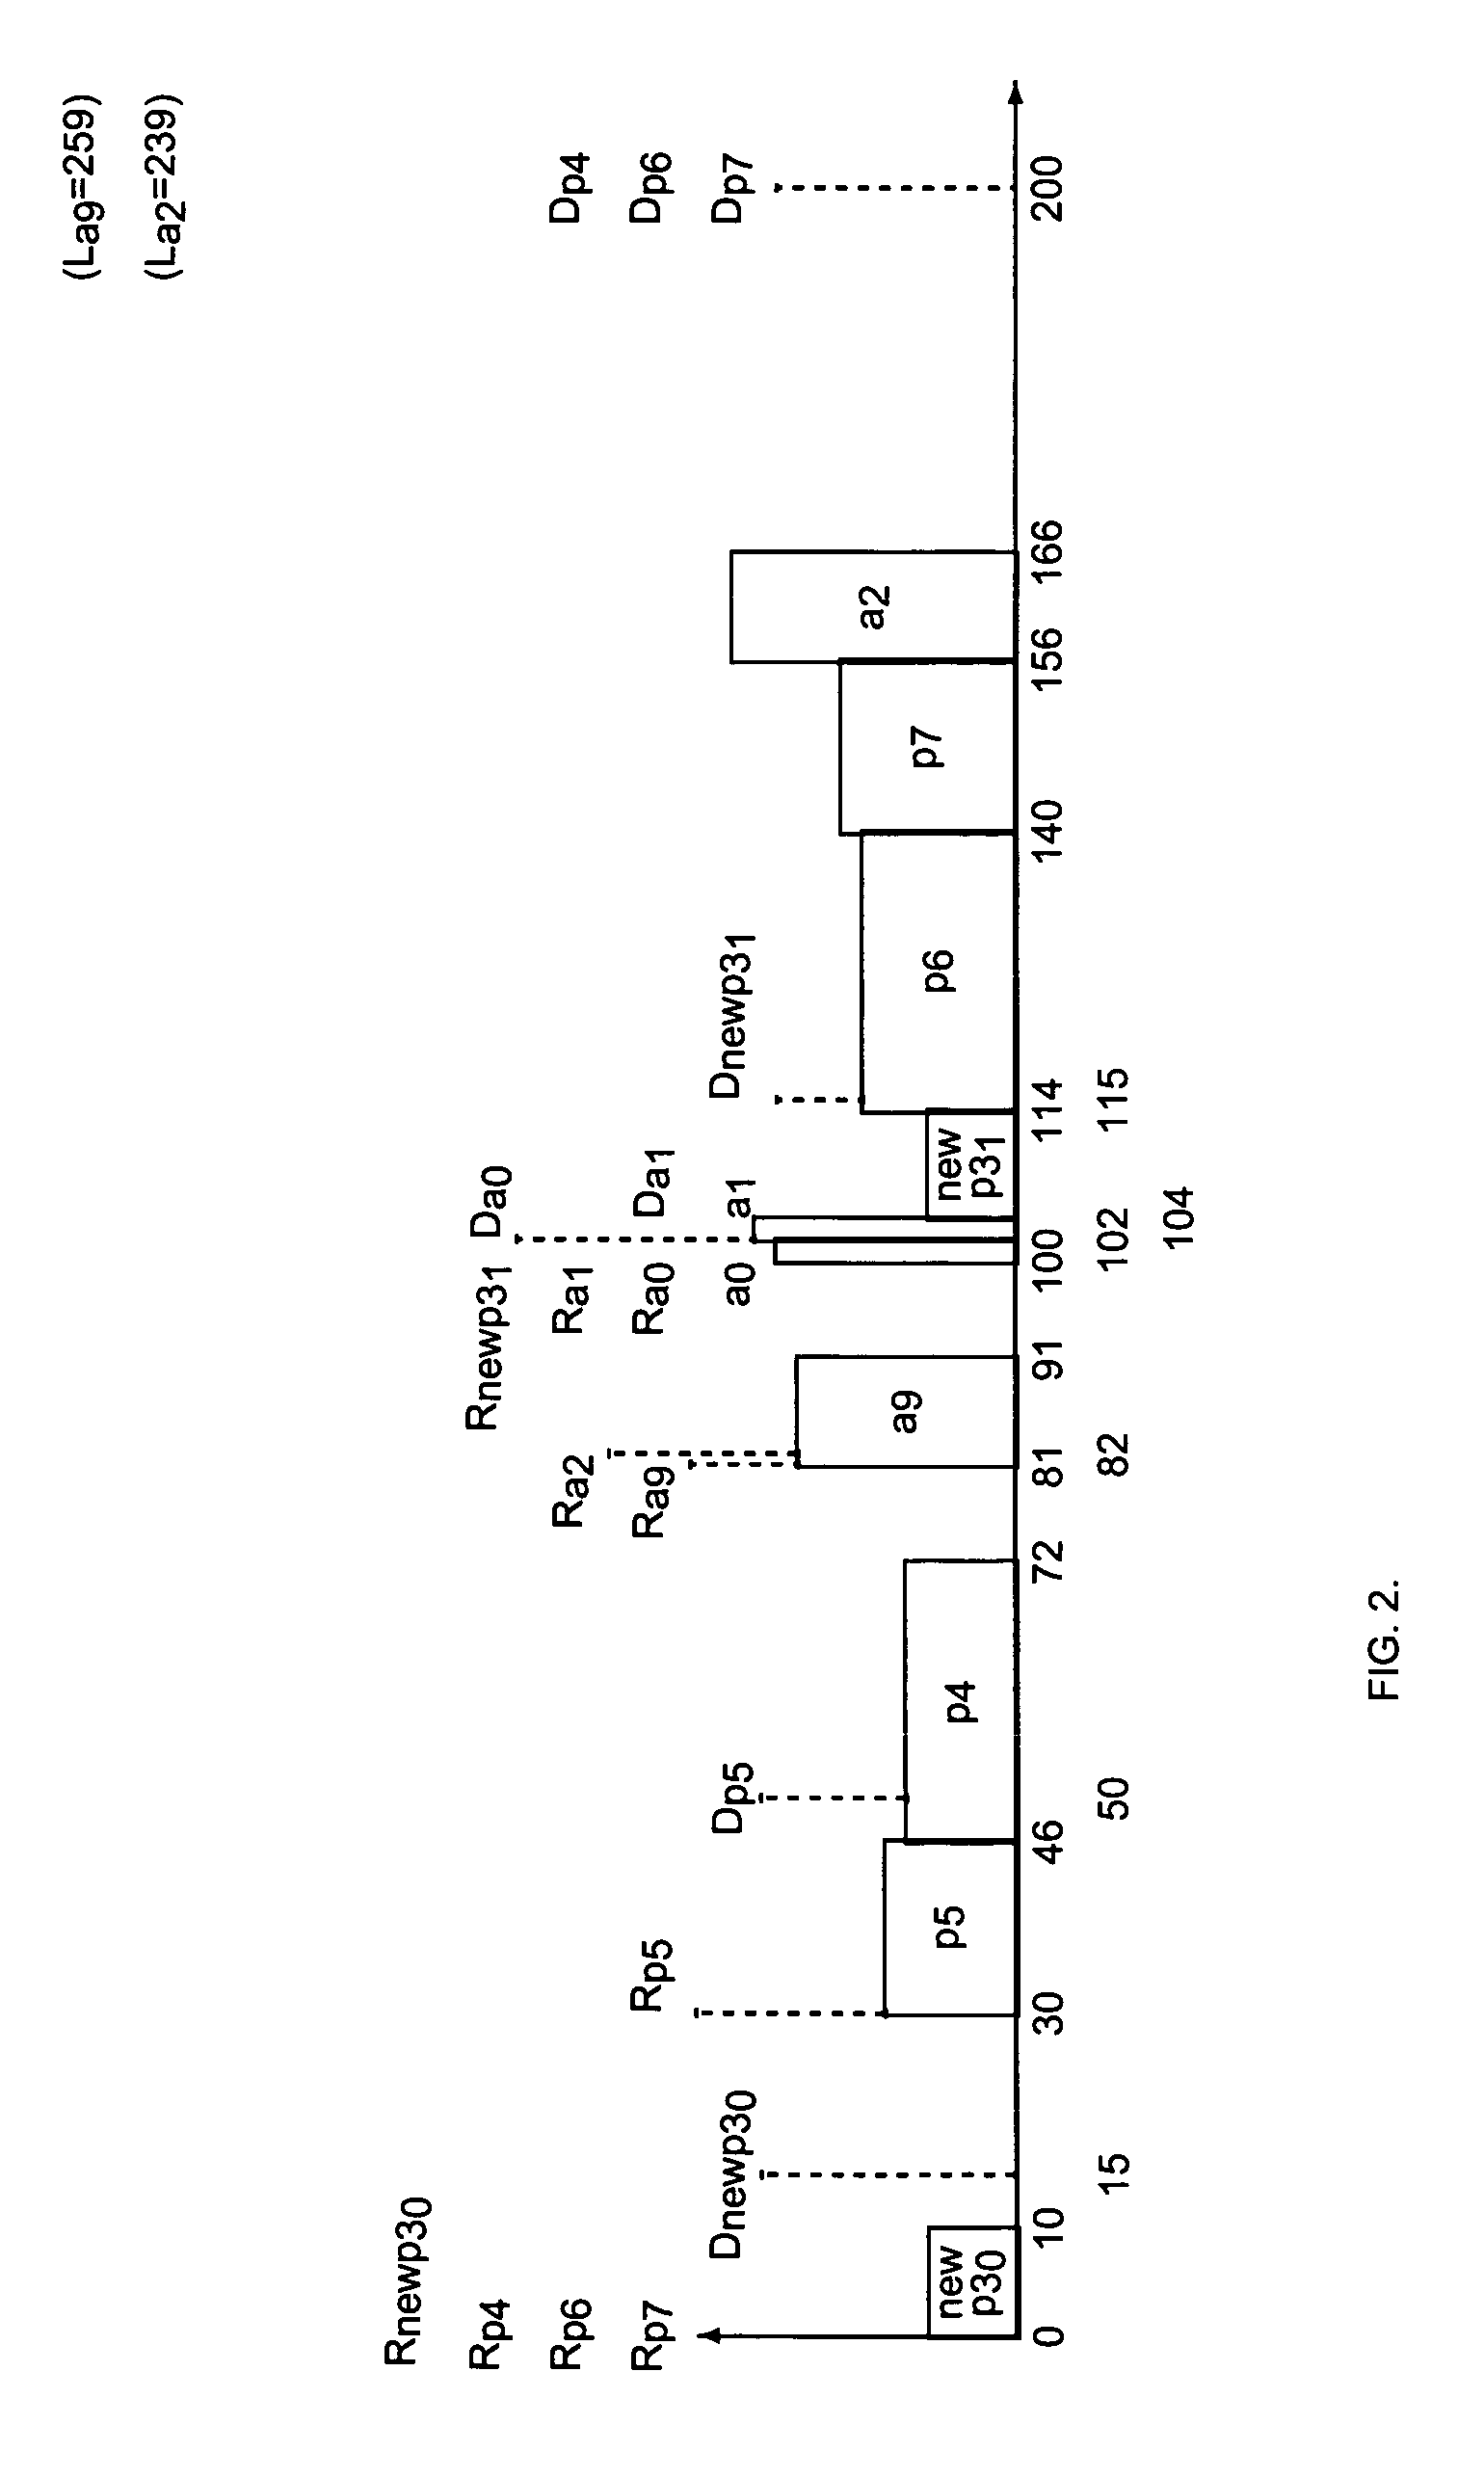 Method for scheduling executions of real-time processes to guarantee satisfaction of various timing constraints